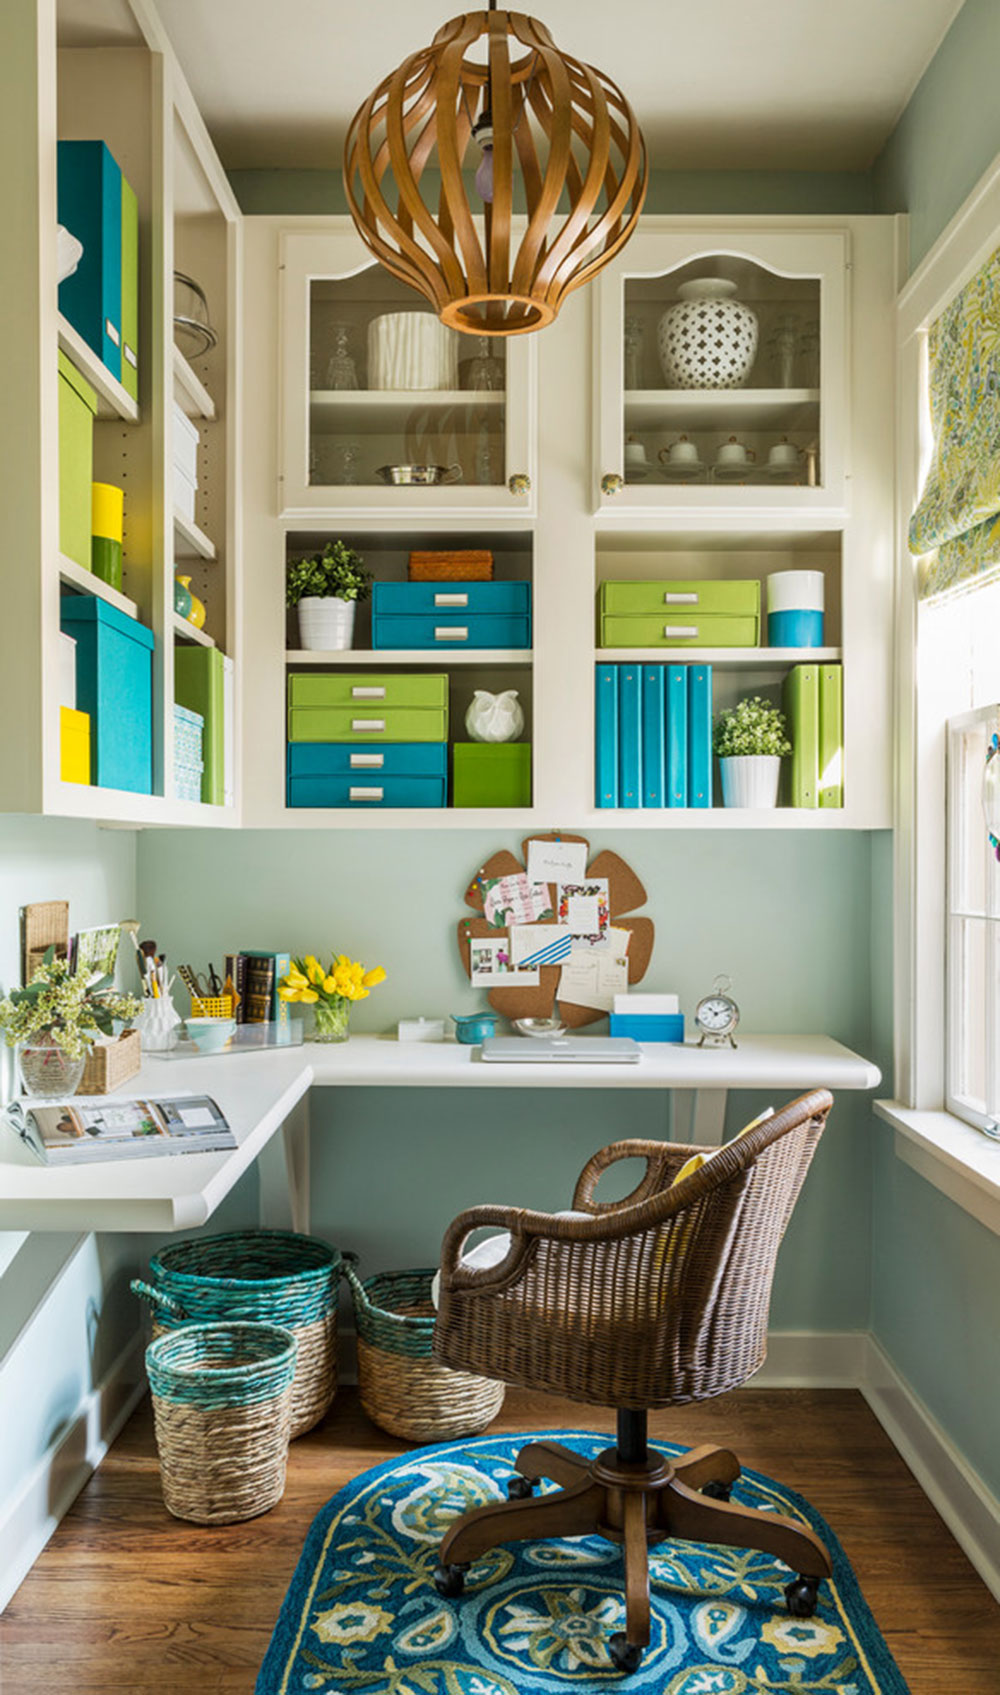 Heights-Residence-by-Kathryn-J.-LeMaster-Art-n-Design The best ideas on how to organize a home office